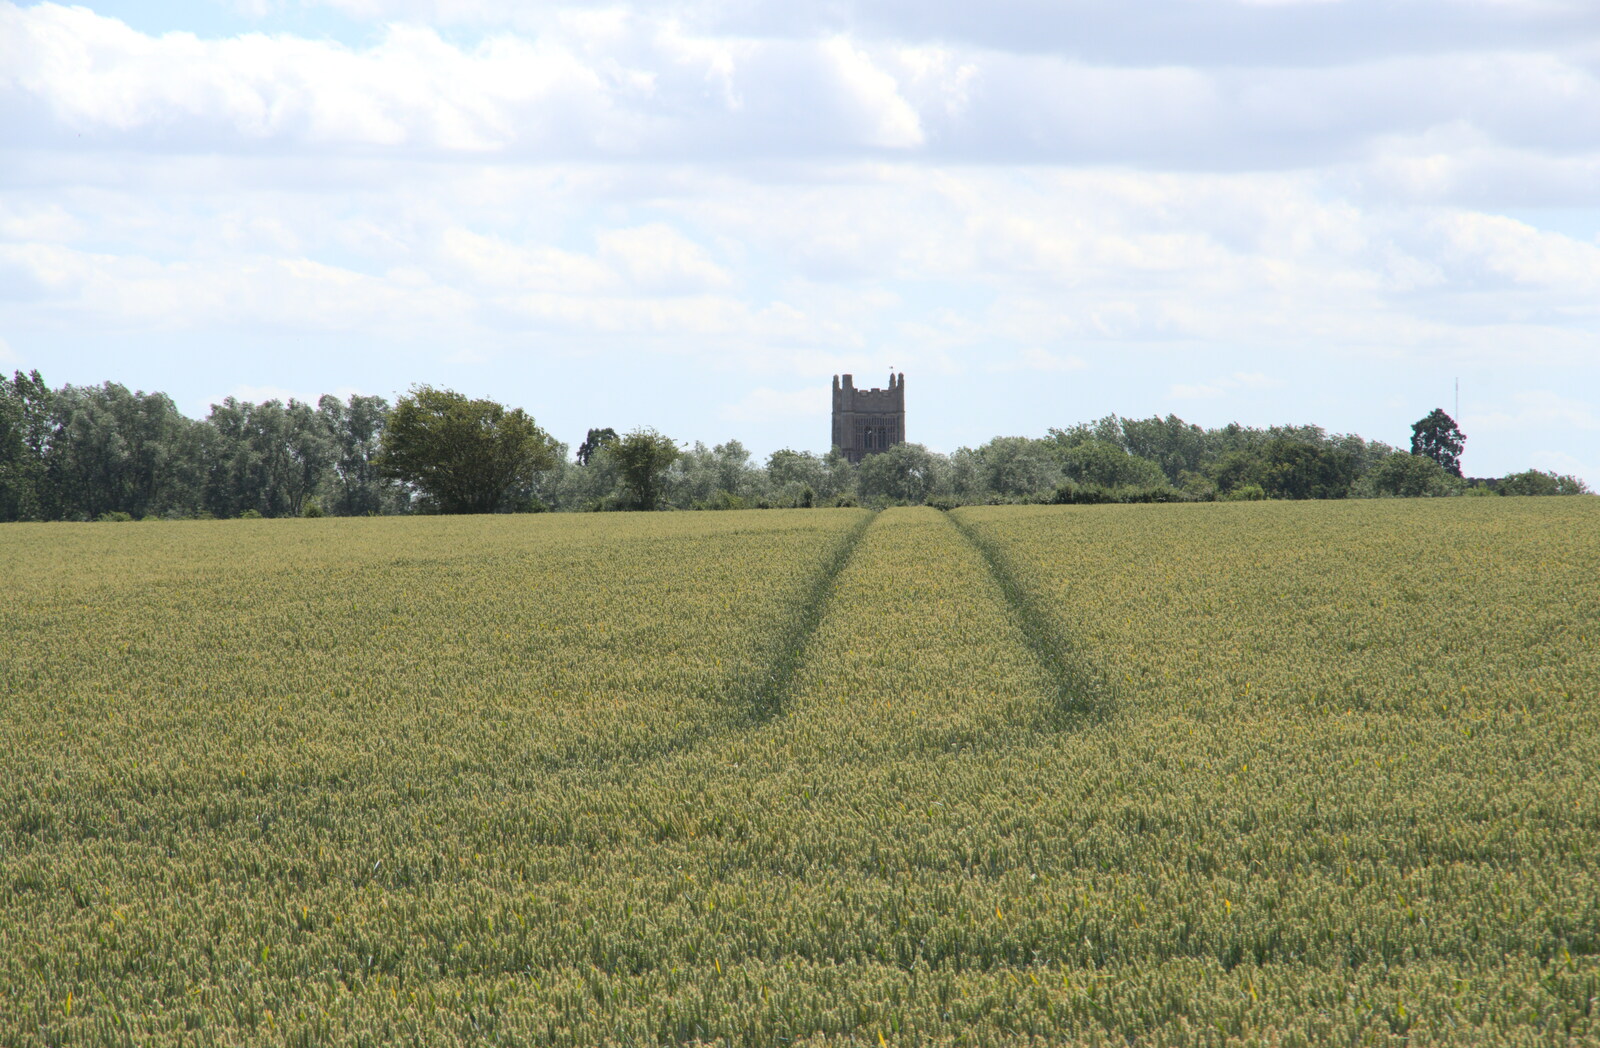 Tractor tracks lead to the church tower from A Walk Around Abbey Bridges, Eye, Suffolk - 5th July 2020